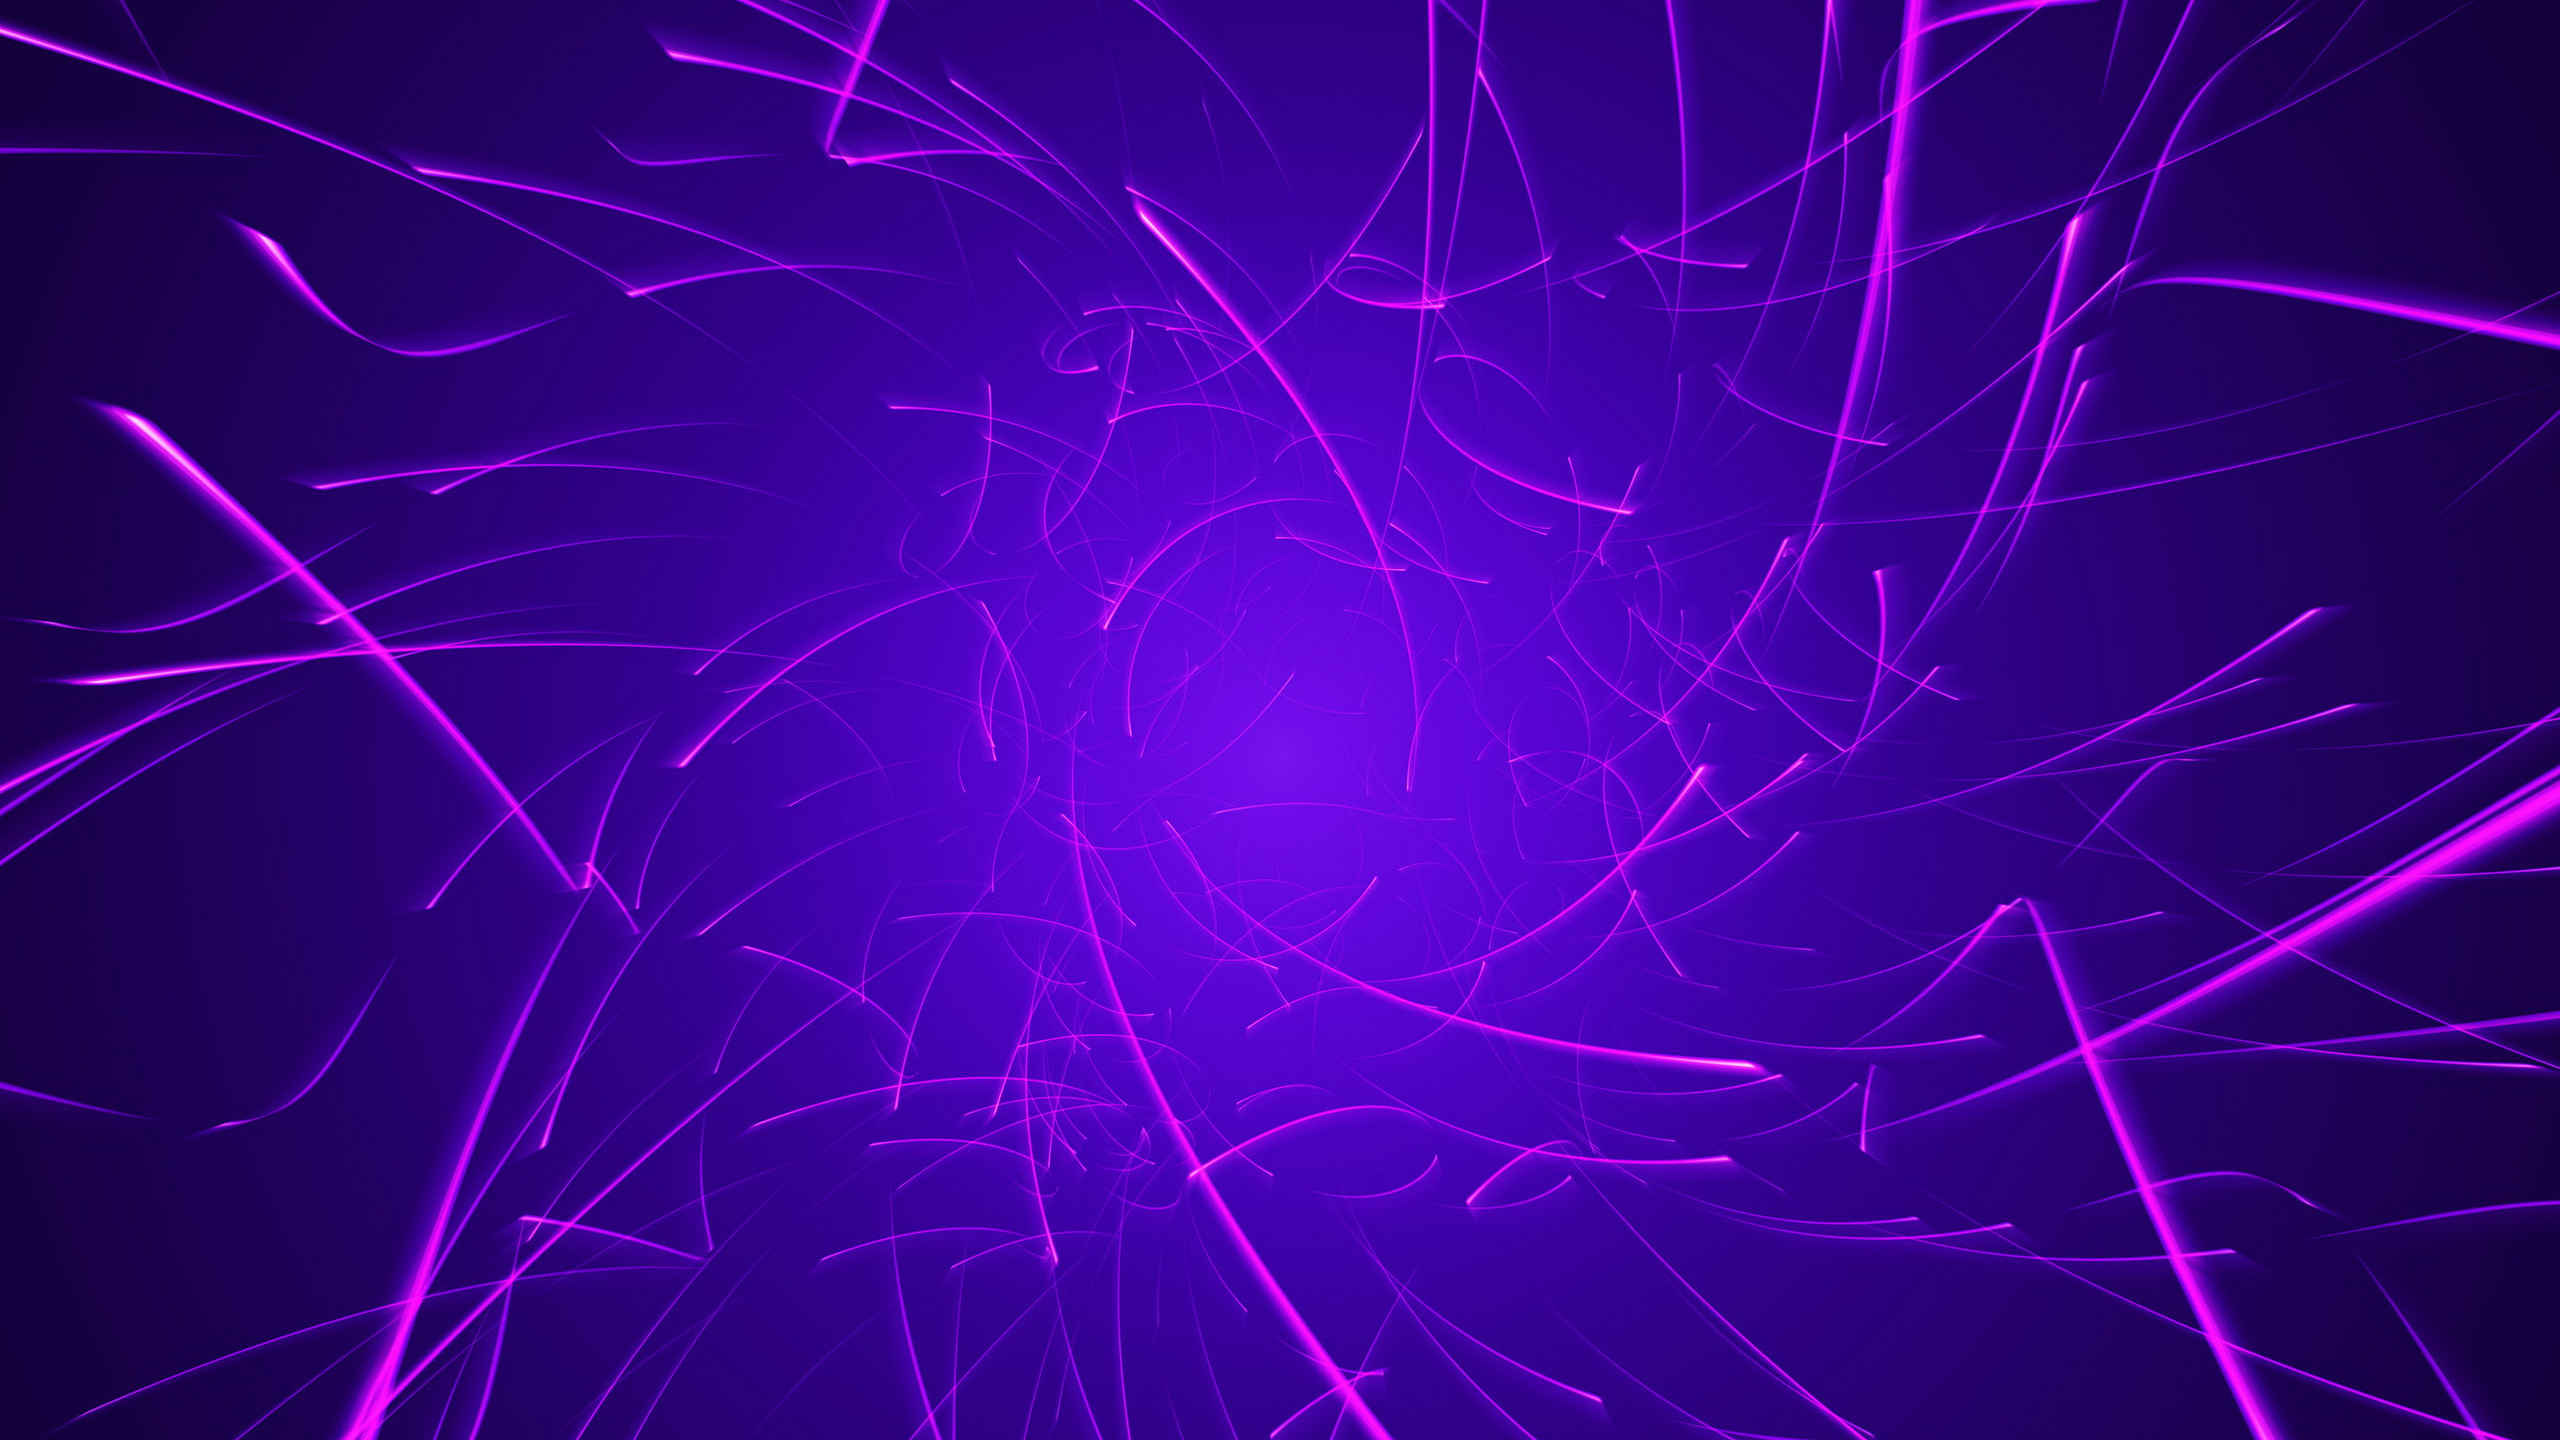 Blue and White Light Illustration. Wallpaper in 2560x1440 Resolution